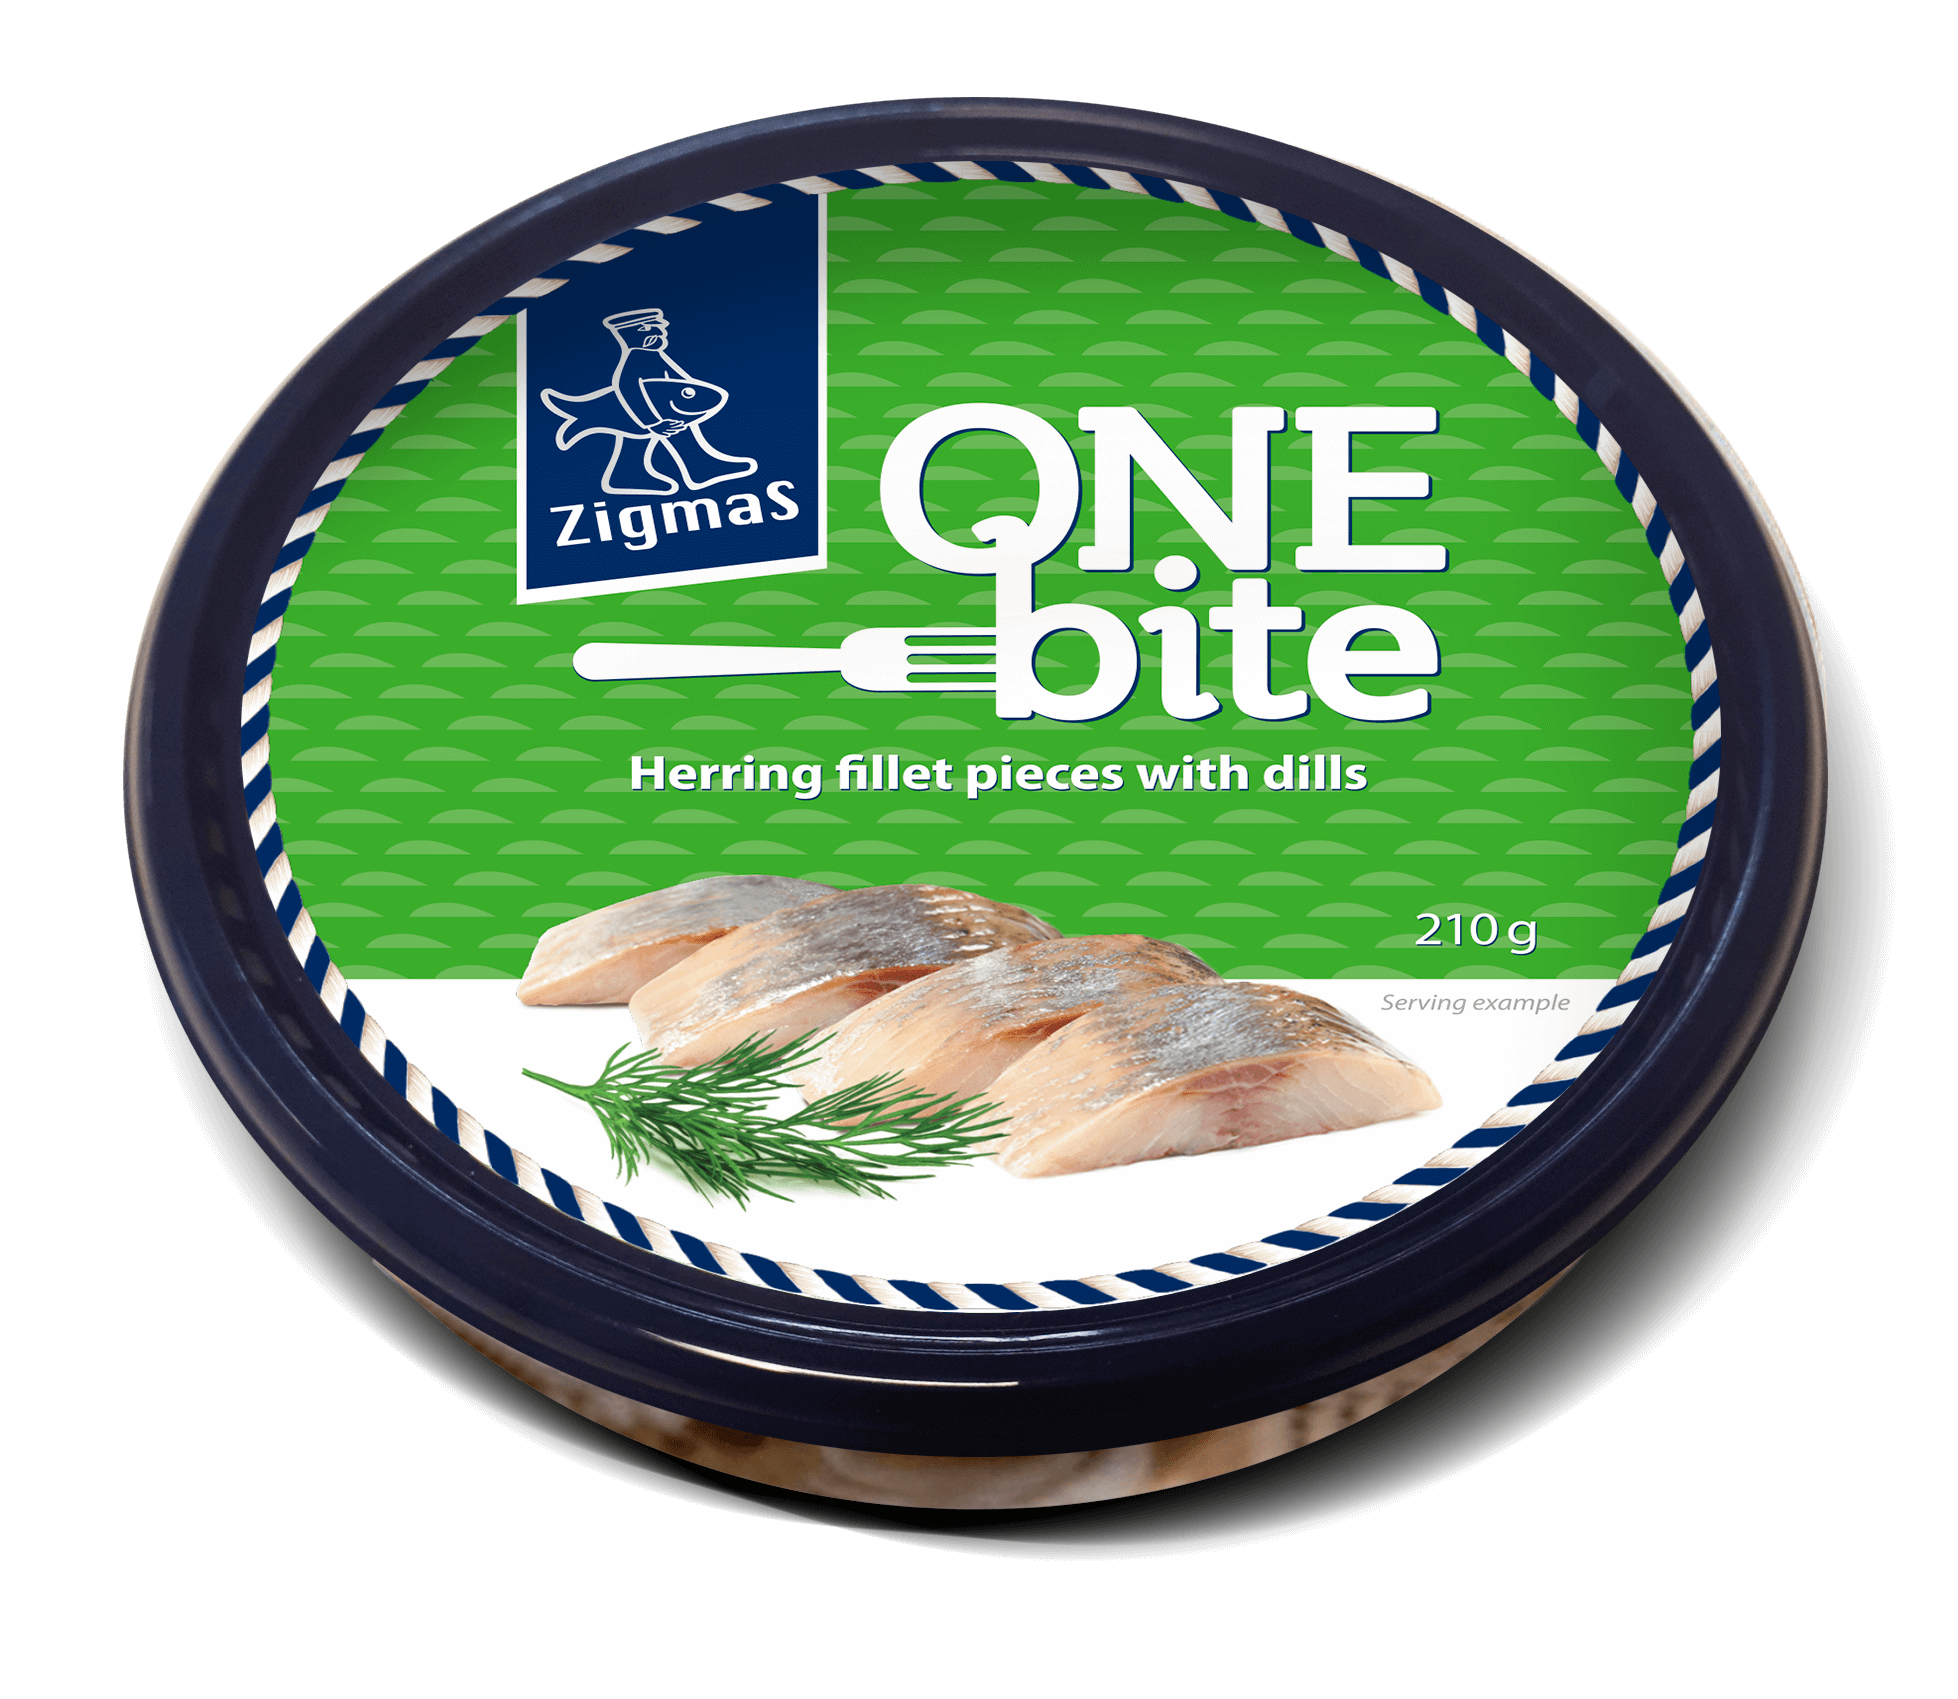 ONE BITE herring fillet pieces with dills